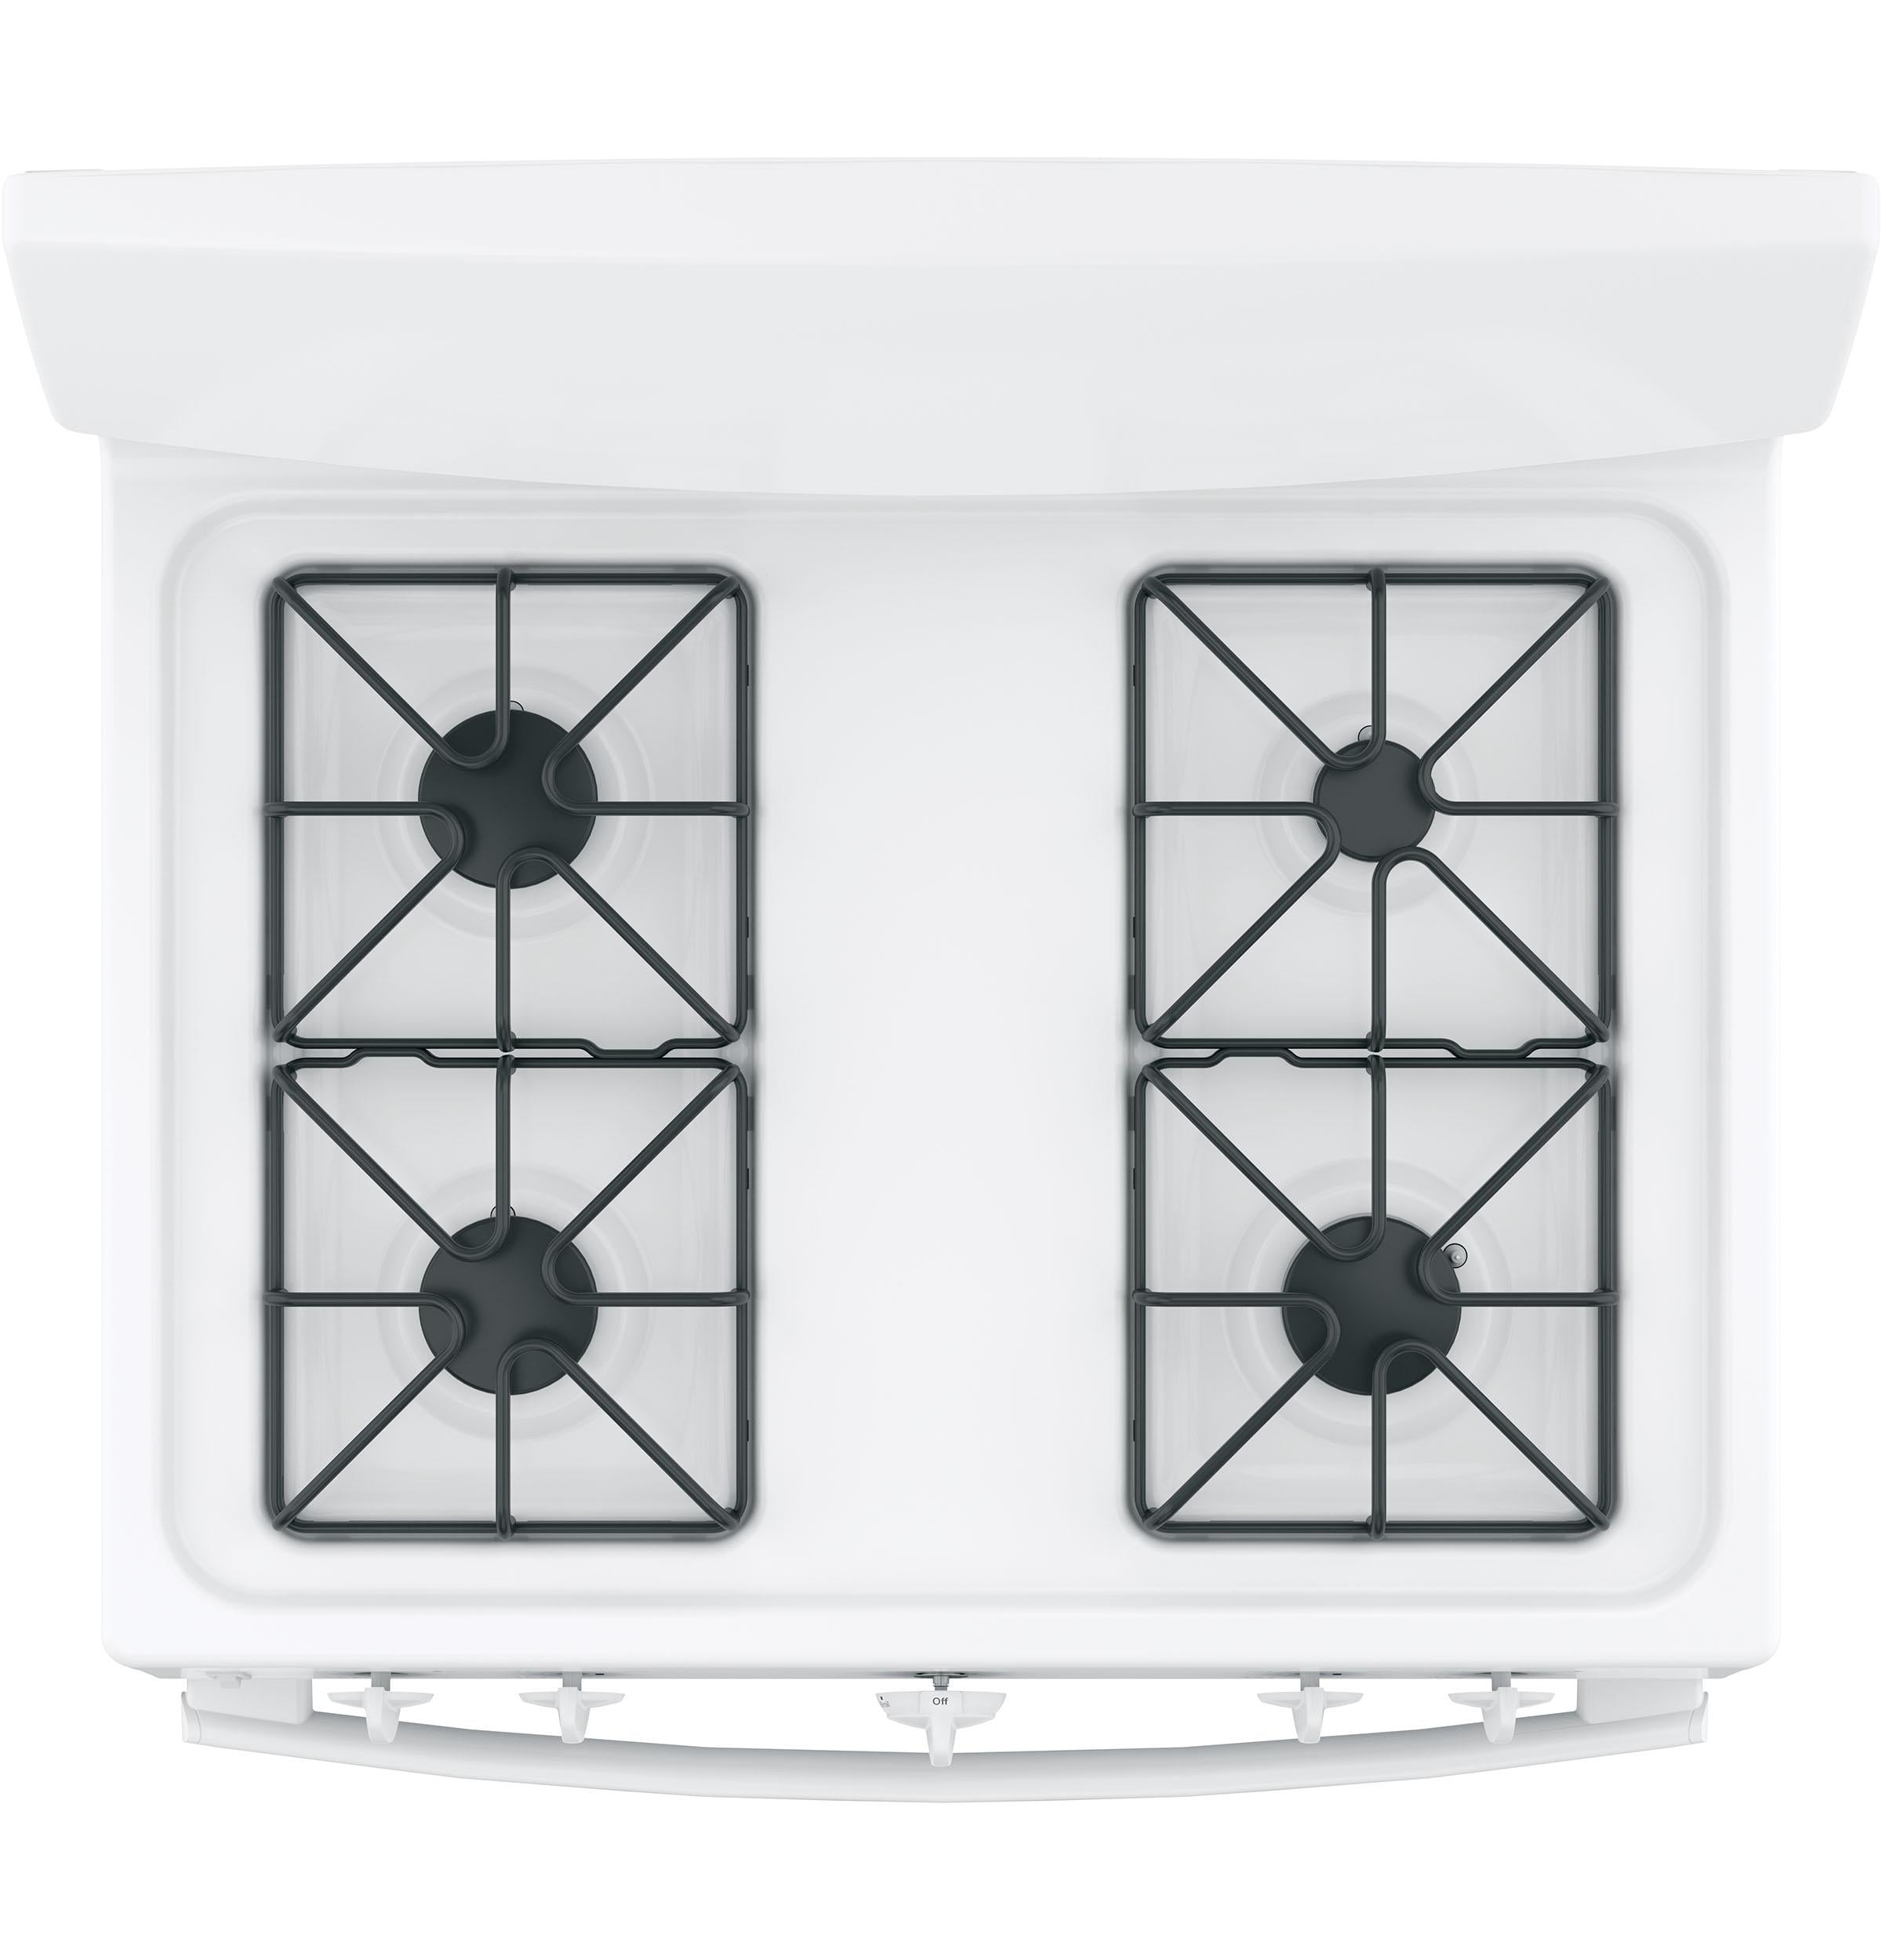 GE® 30" Free-Standing Front Control Gas Range